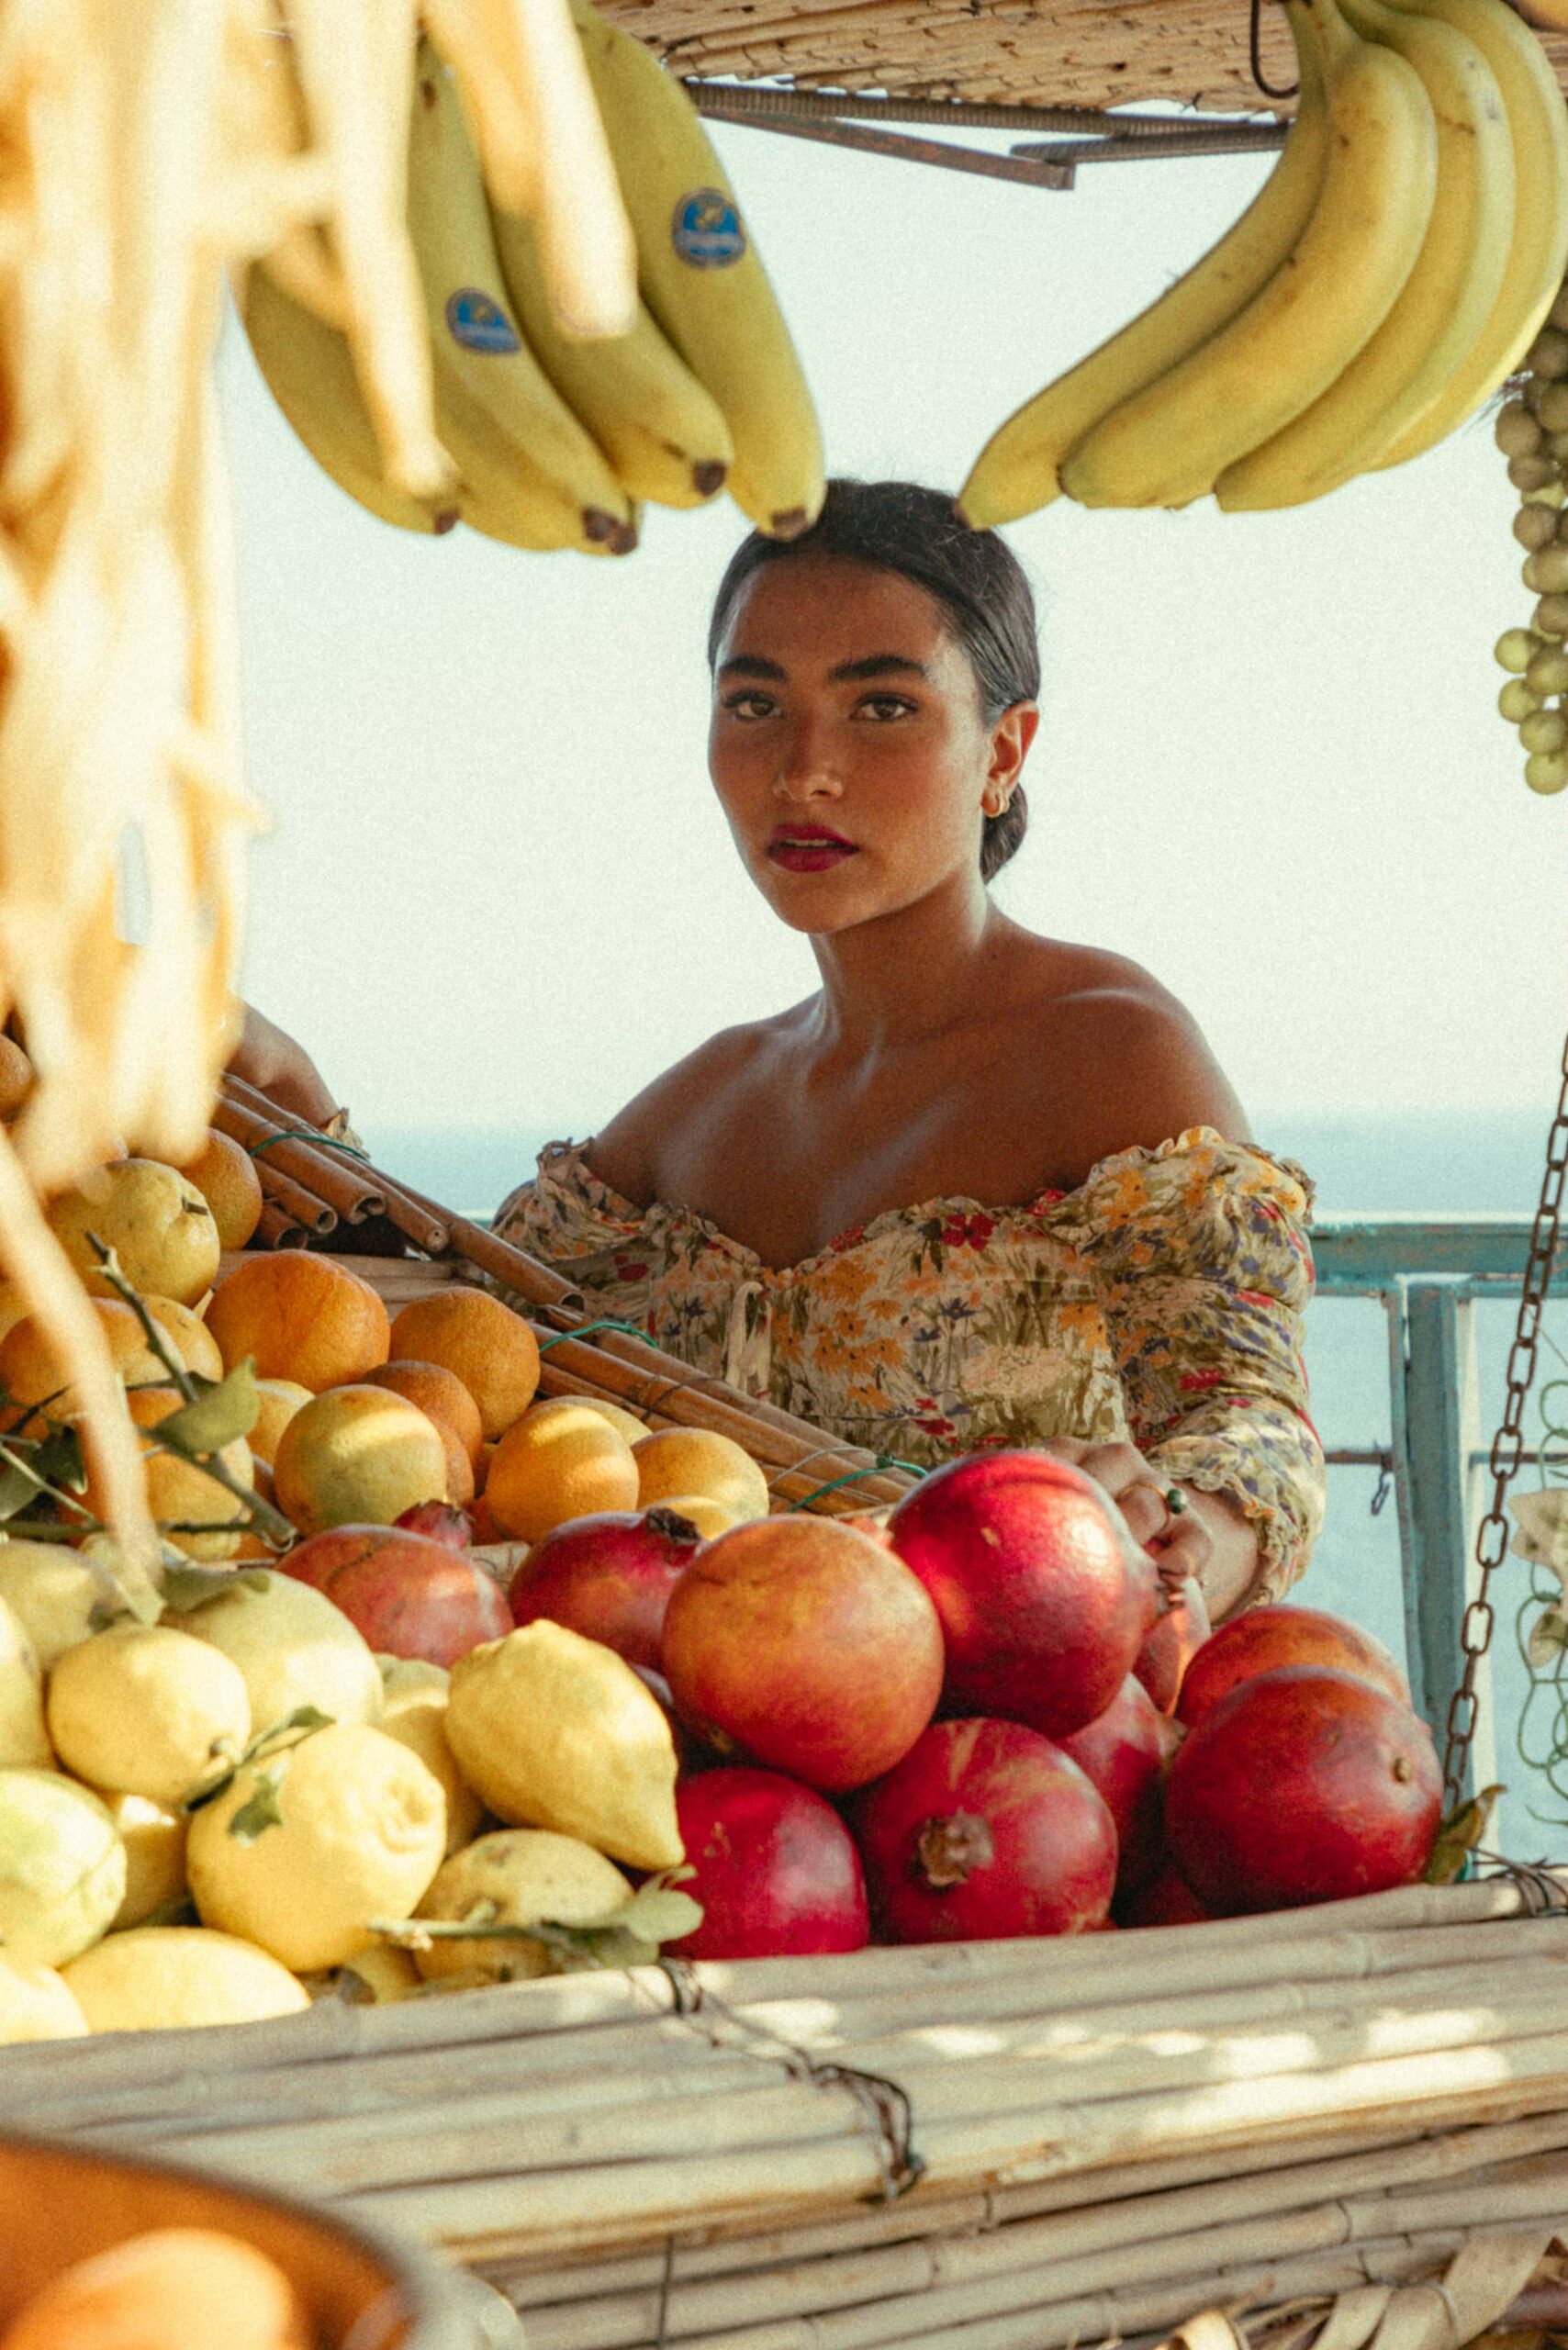 Sienna Mae Gomez surrounded by bananas, oranges, and pomegranates, wearing a yellow floral dress near the sea in Positano